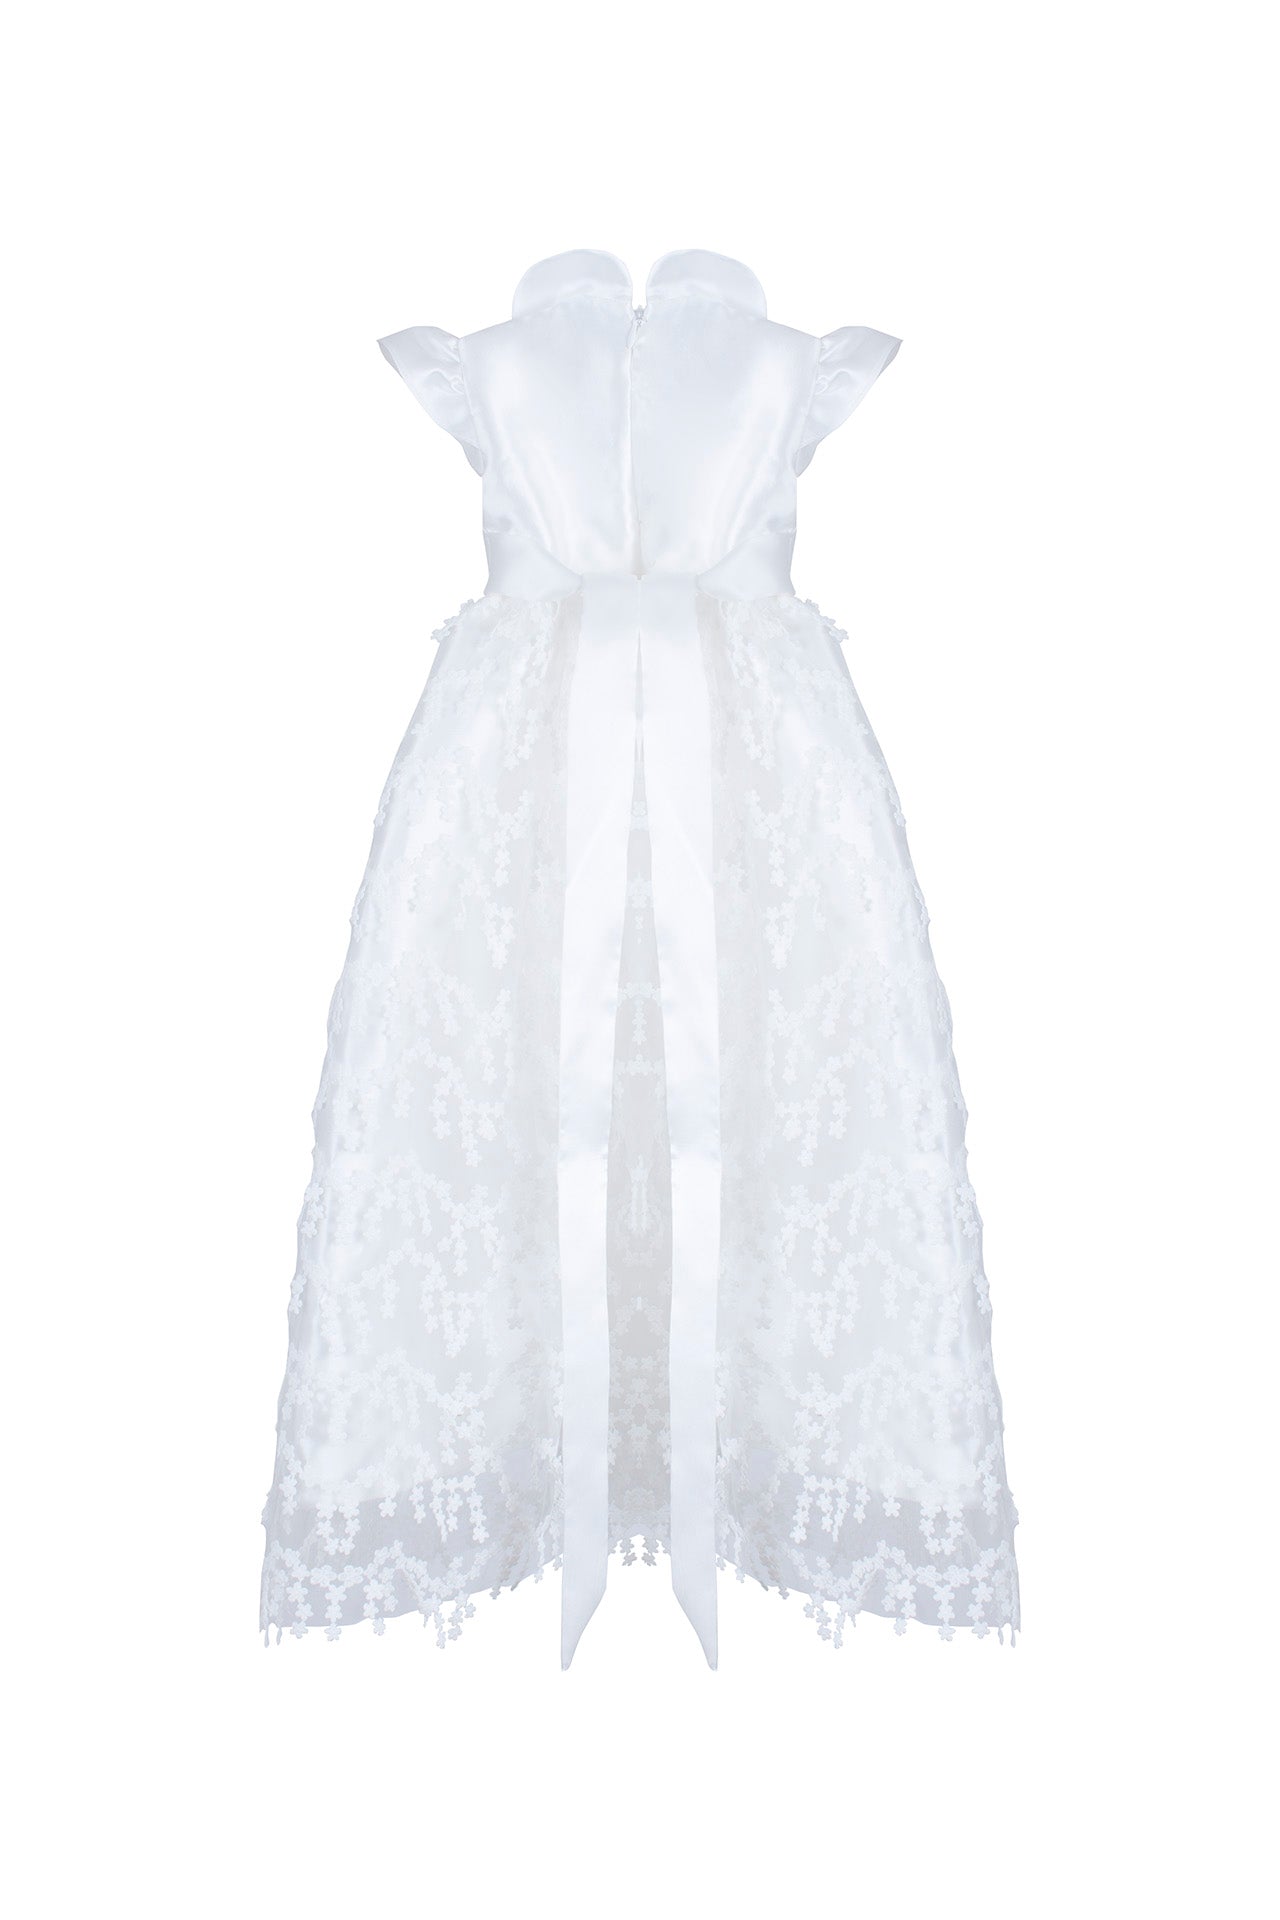 Christening Gown - Lilybeth - Ivory